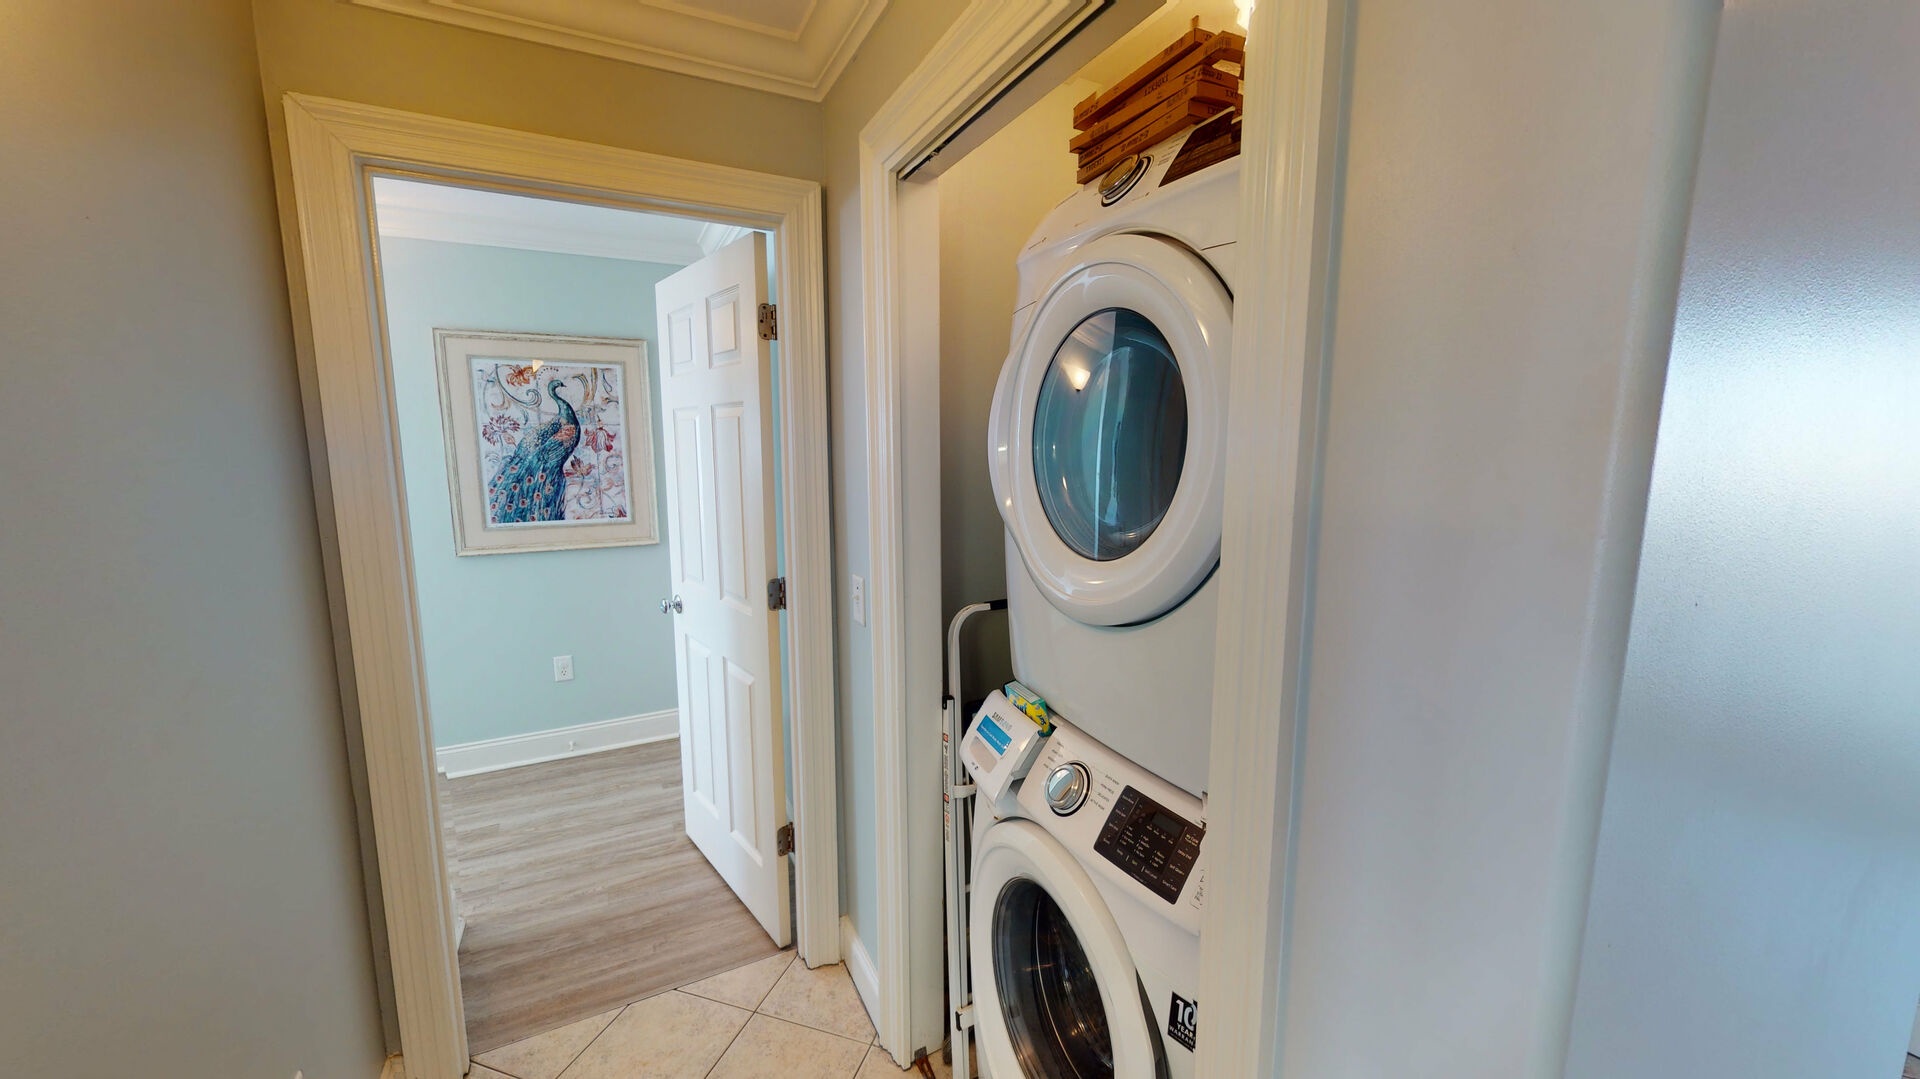 2nd floor washer and dryer